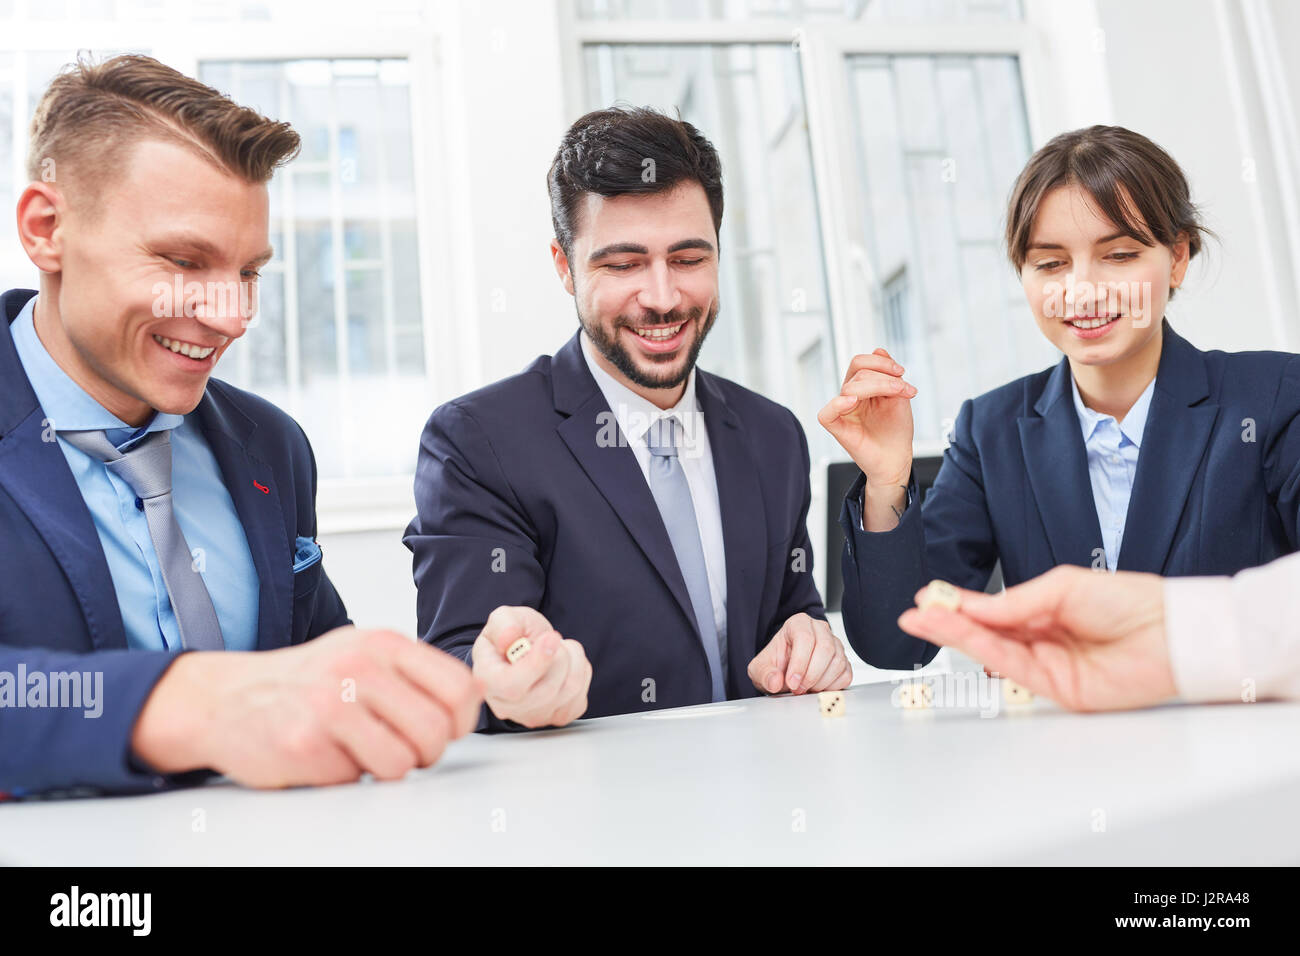 Business people playing dice game in team building creative workshop Stock Photo